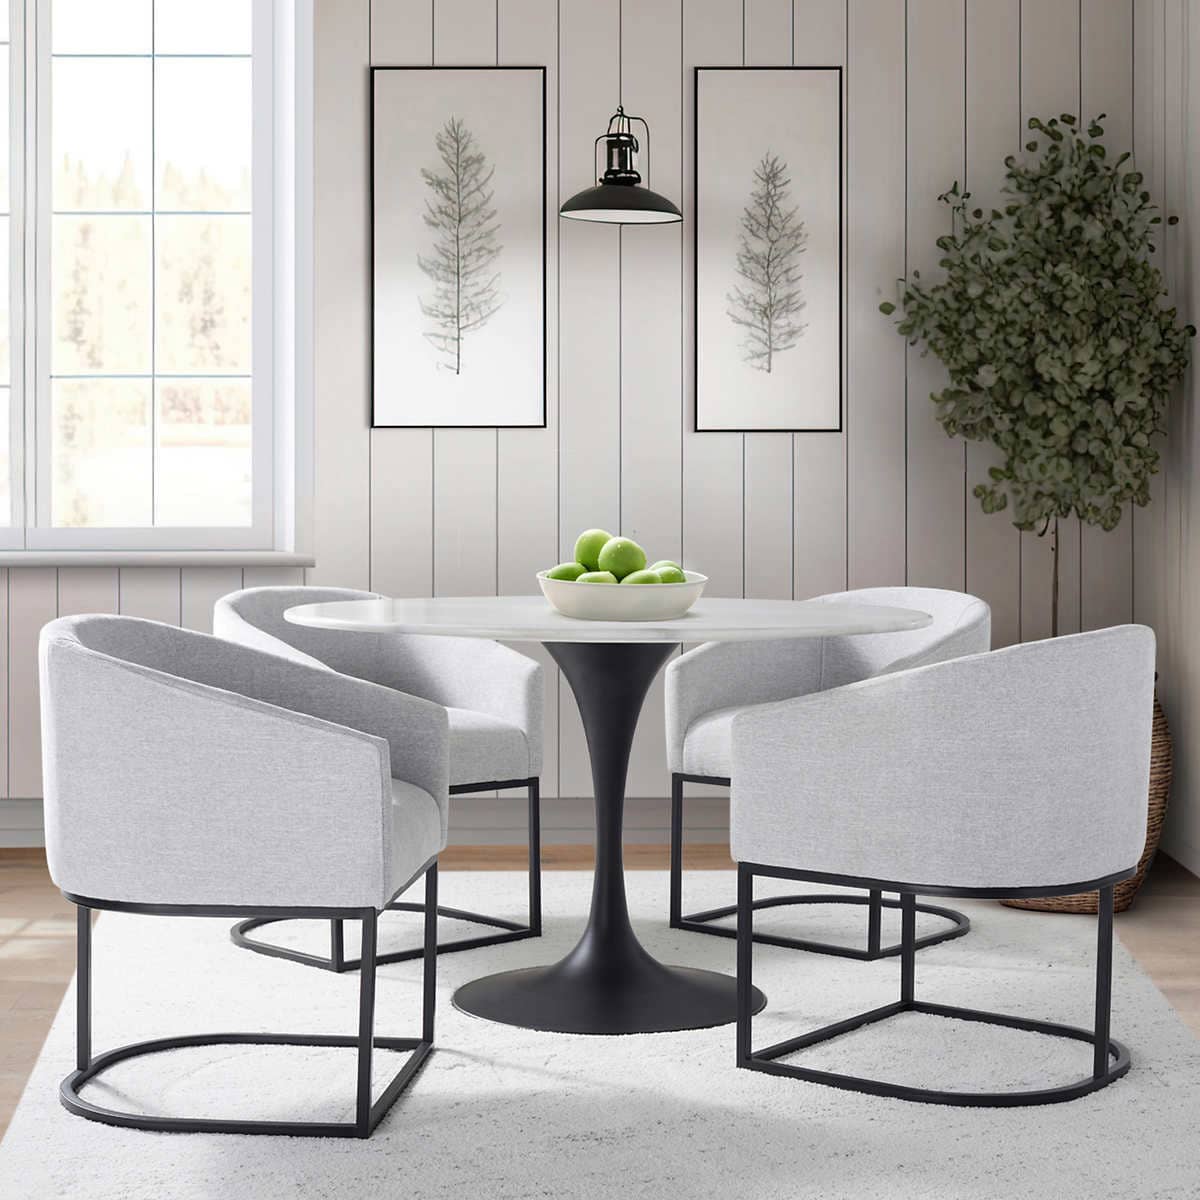 Costco Bastion 5-piece Marble Dining Set